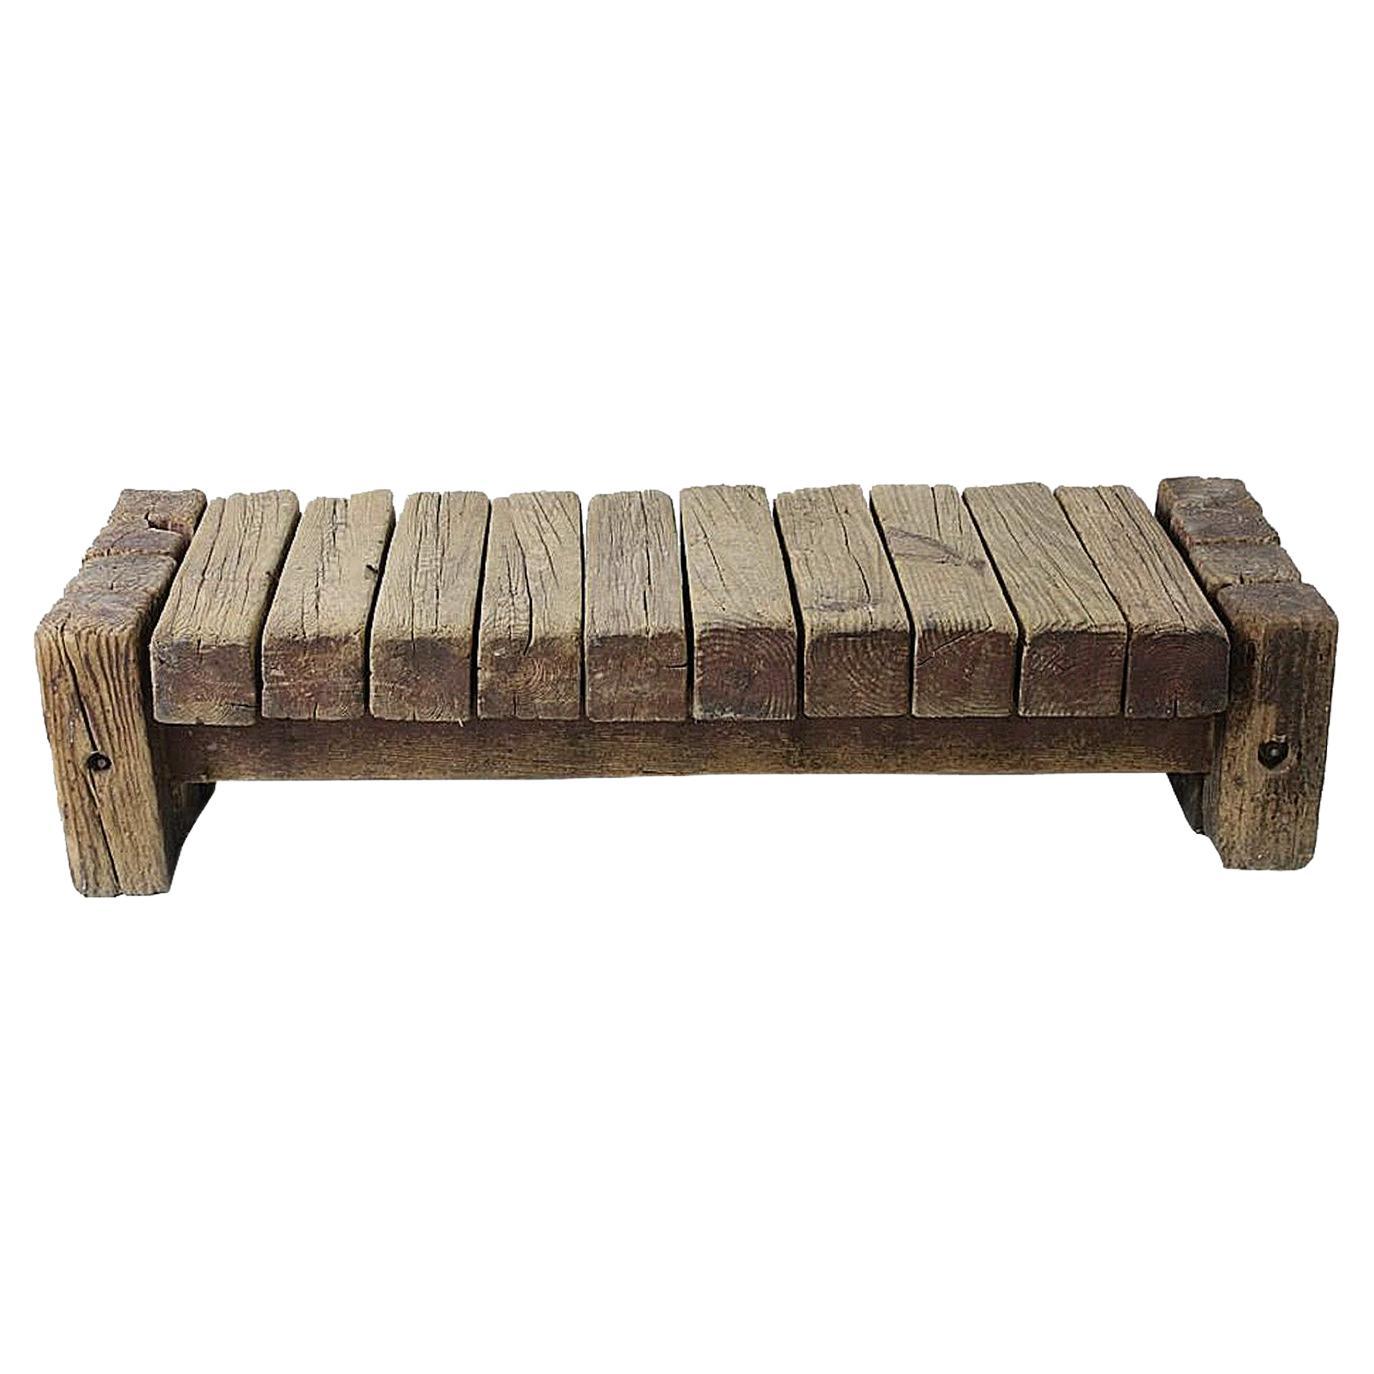 American Unusual Large Solid Pine Bench Made of Squared Logs 1960s / 1970s For Sale